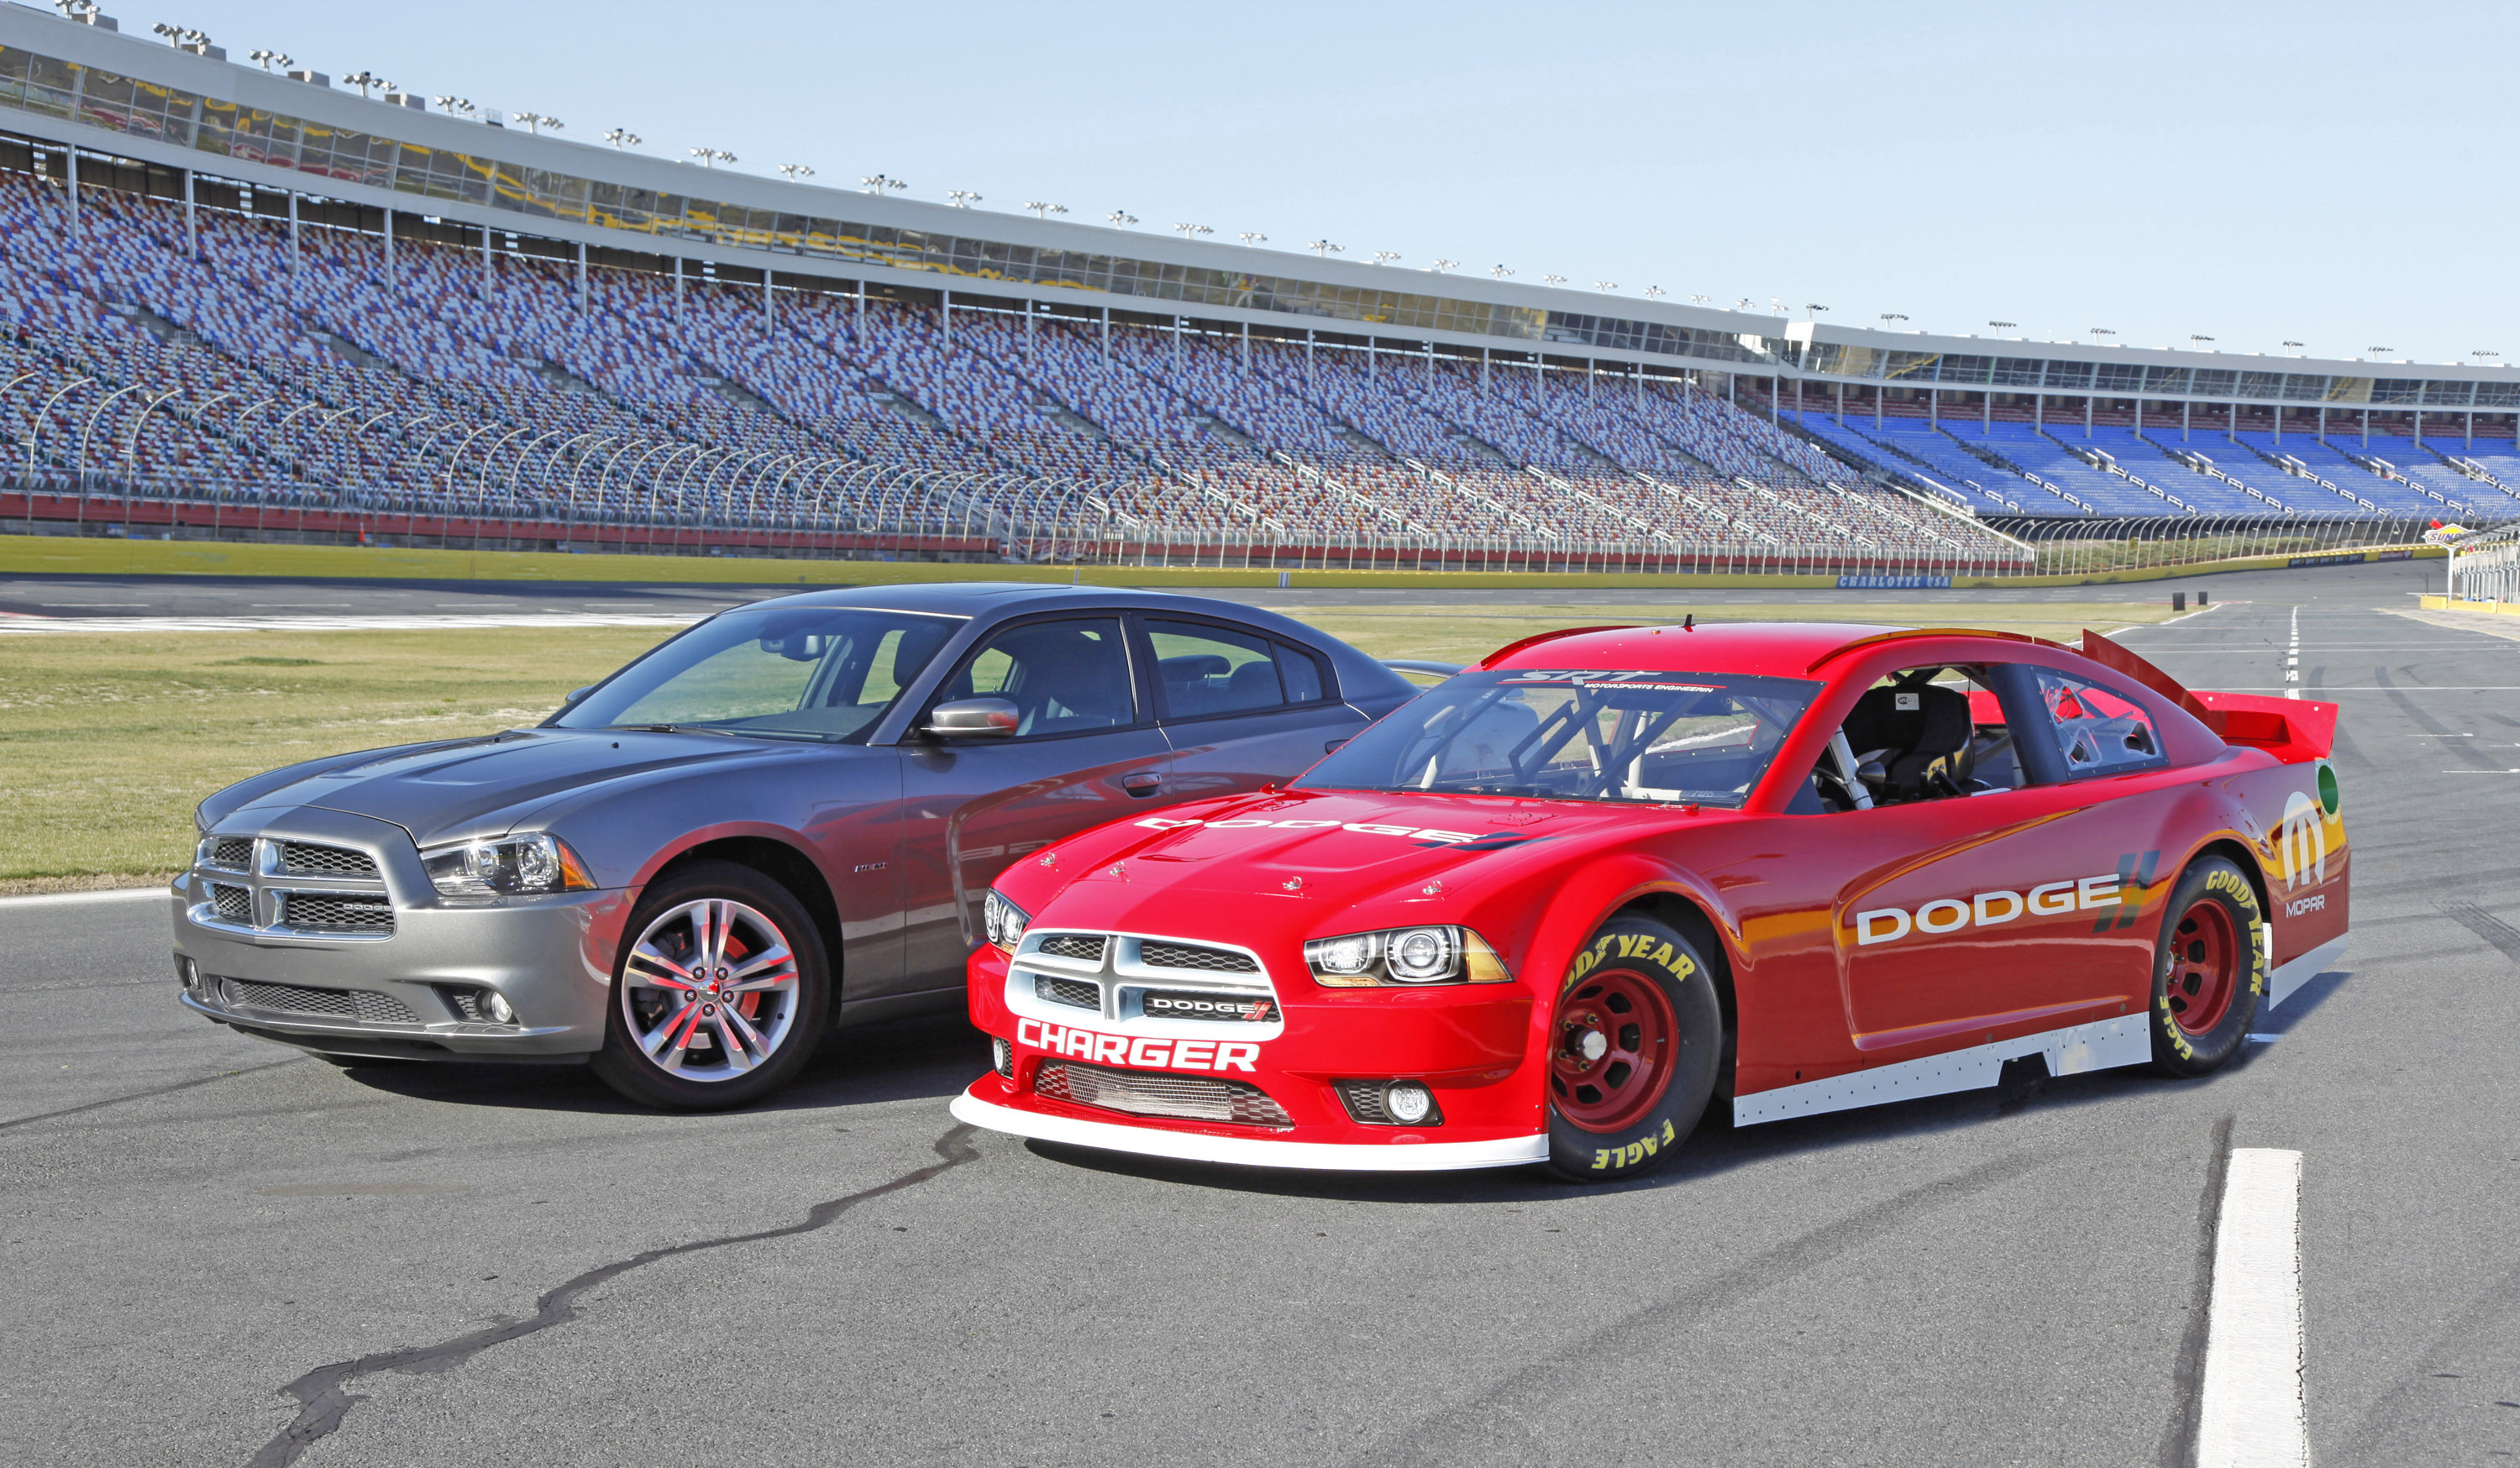 NASCAR Sprint Cup Dodge Charger